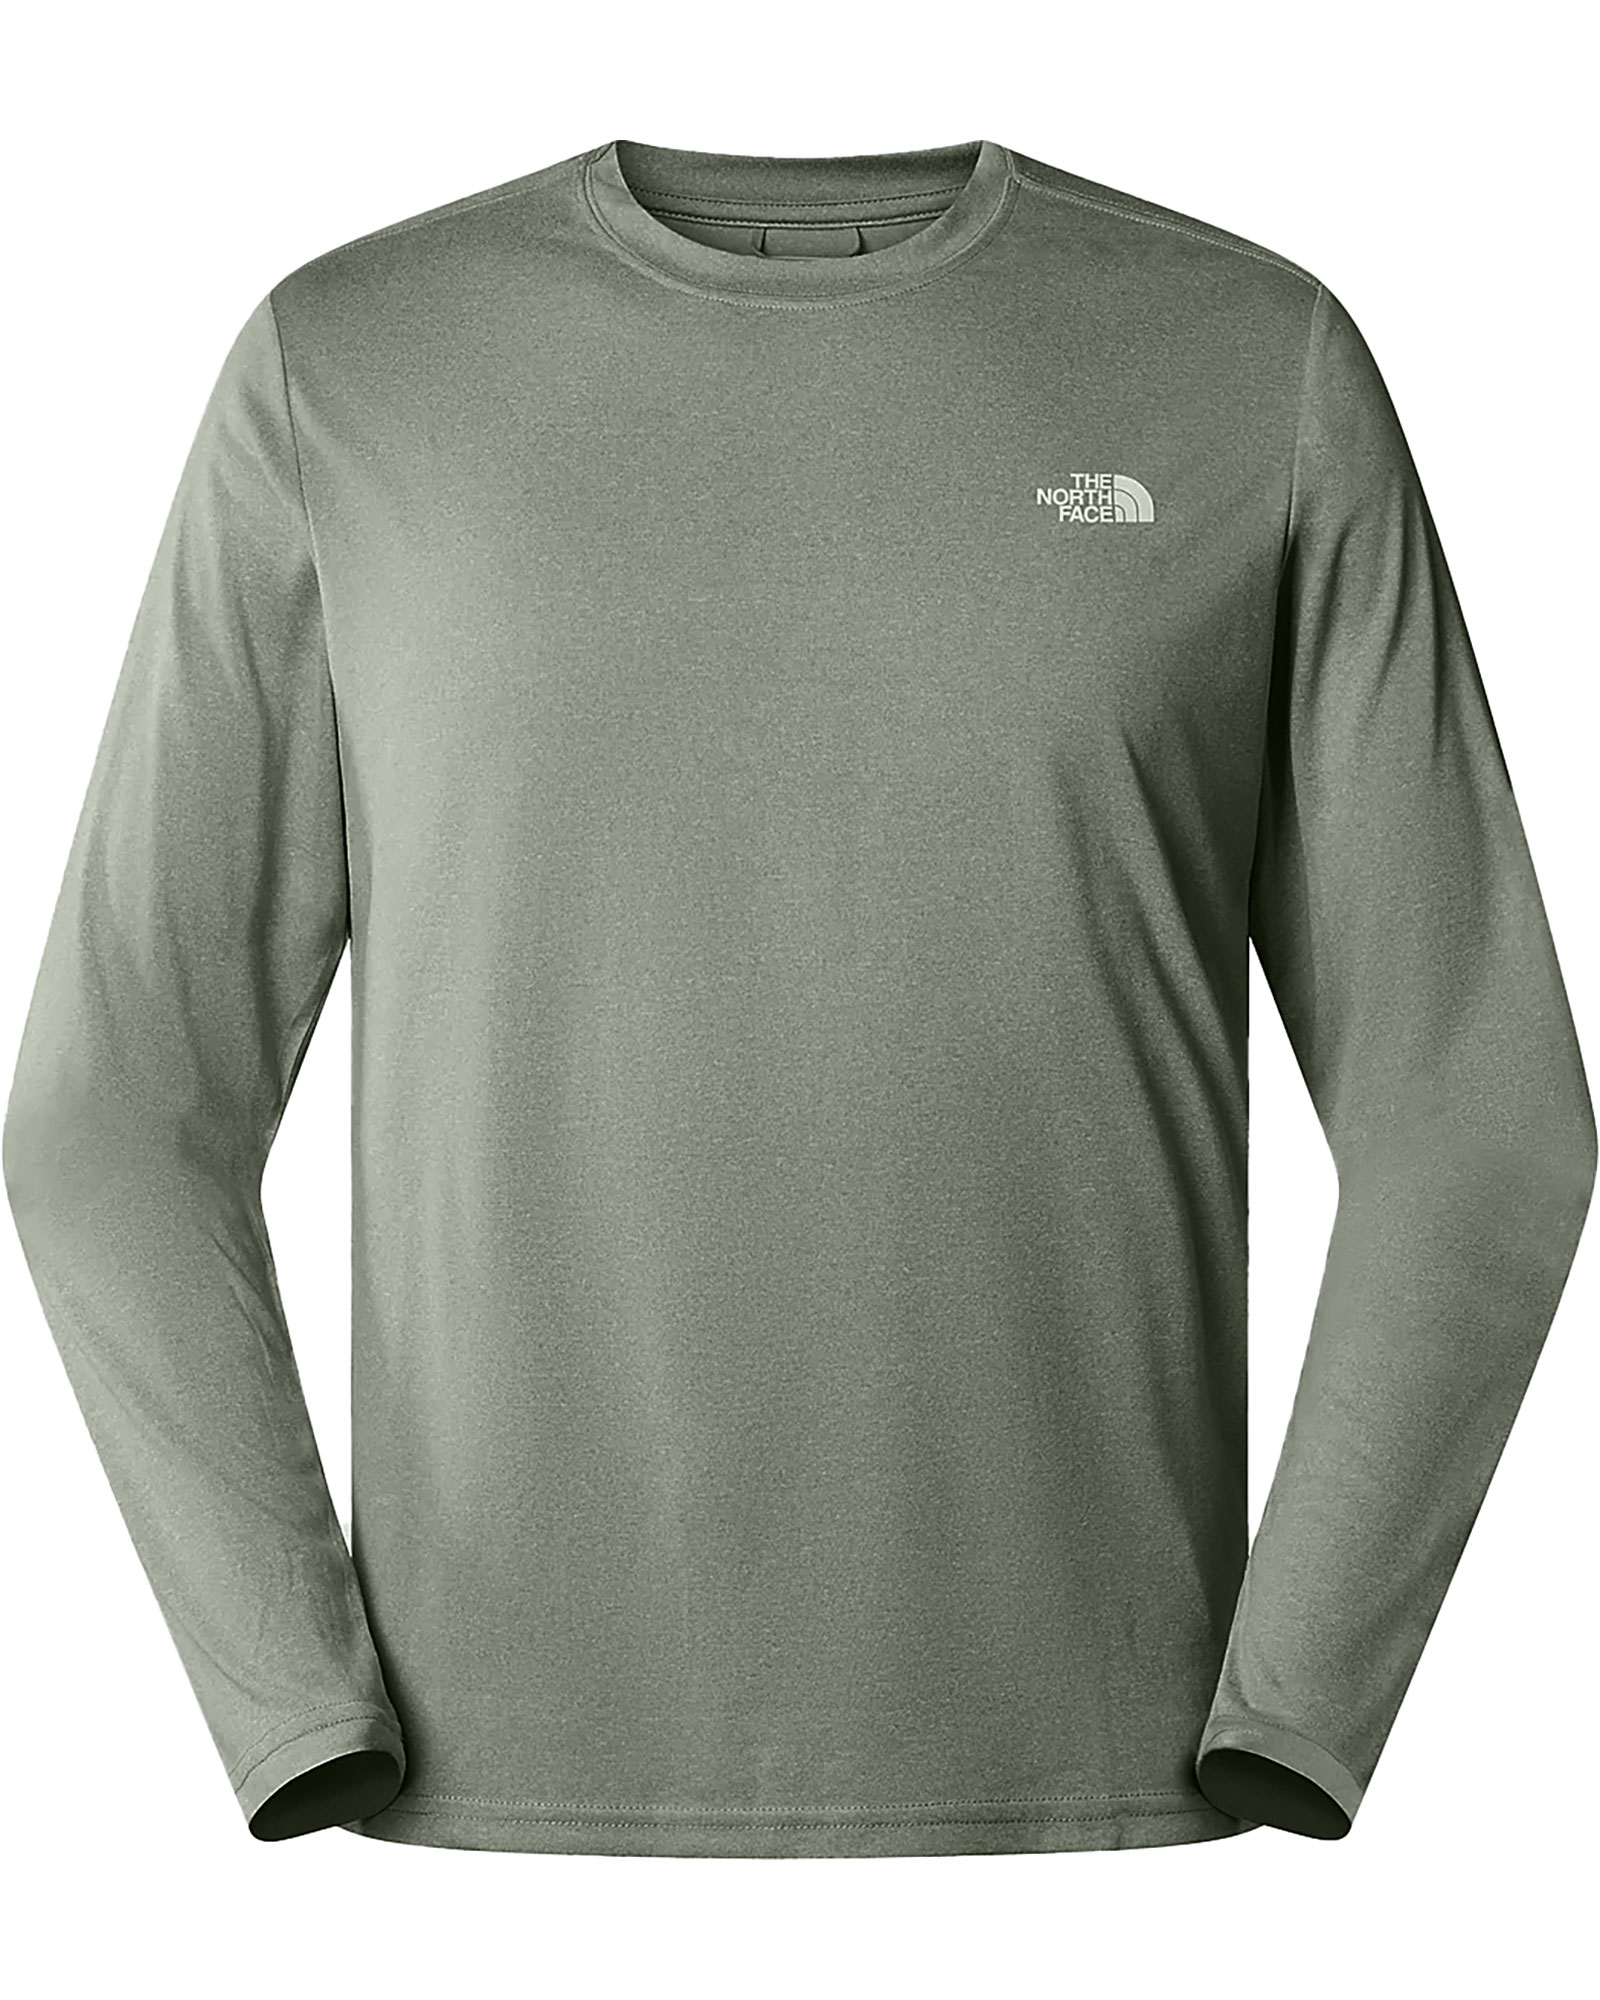 The North Face Men’s Reaxion Amp Long Sleeved Crew T Shirt - New Taupe Green Heather L